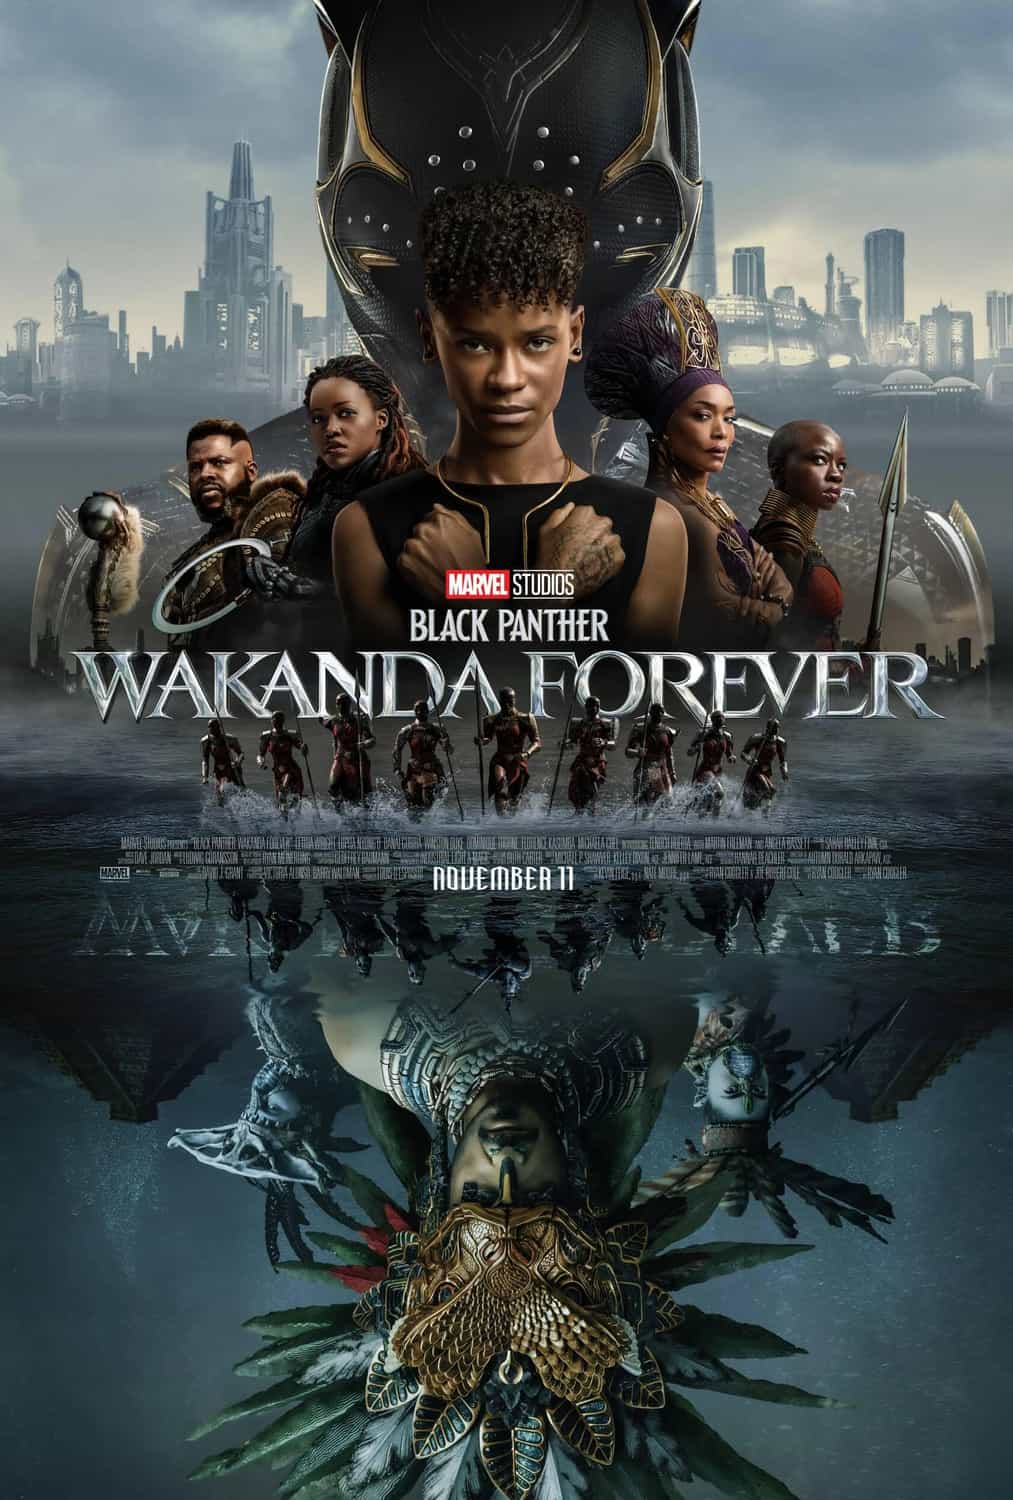 Black Panther Wakanda Forever is given a 12A age rating in the UK for moderate violence, threat, injury detail